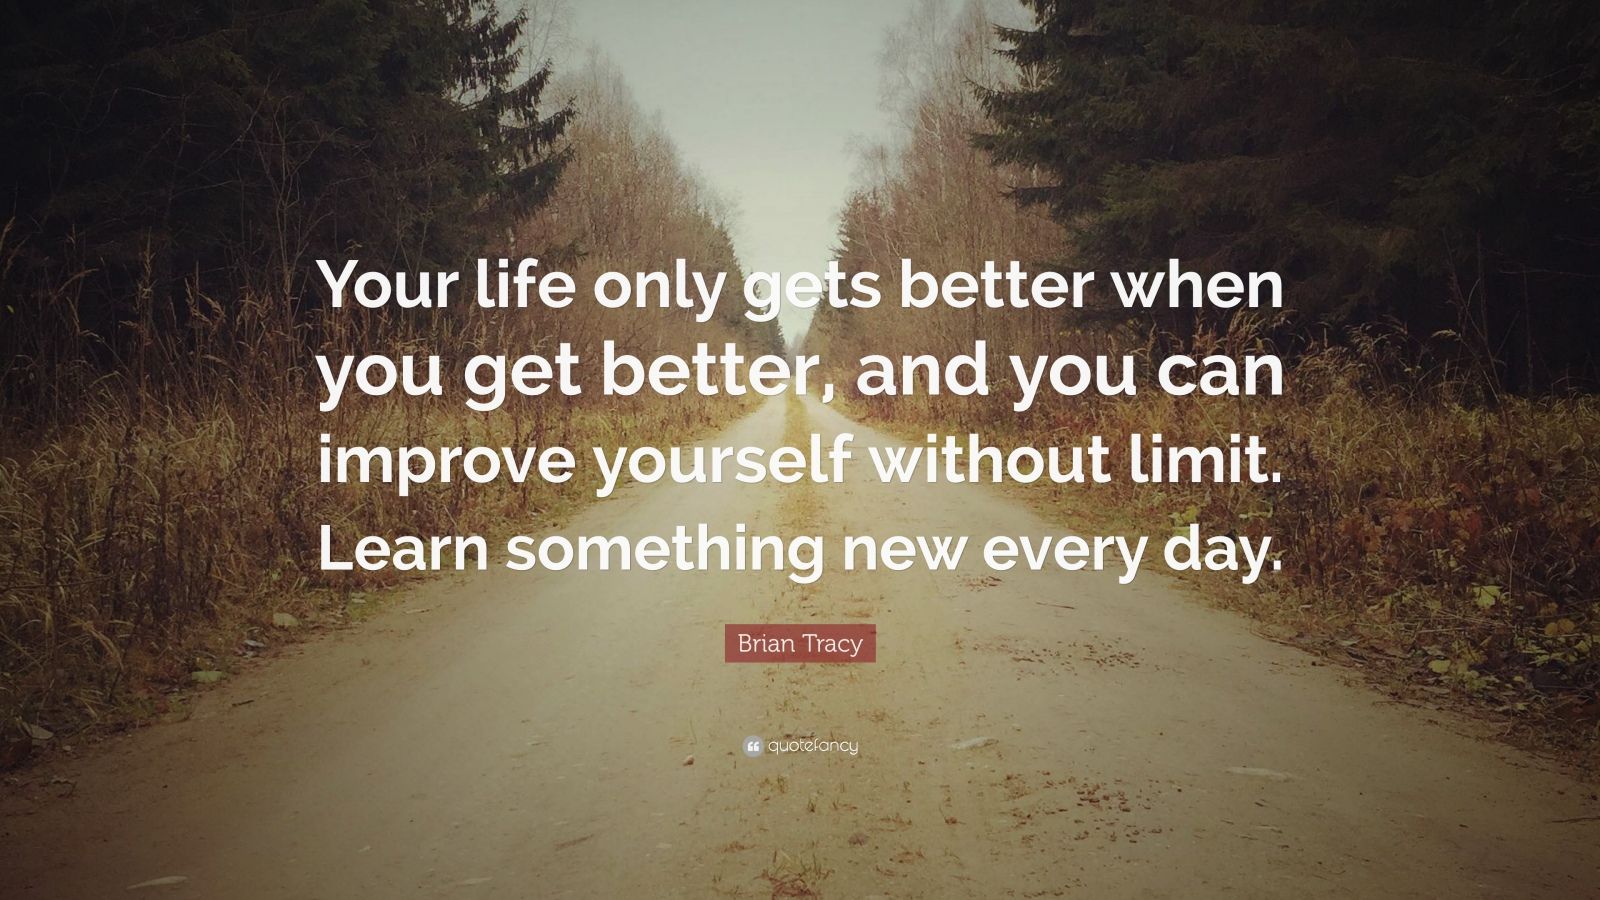 Brian Tracy Quote “Your life only gets better when you get better, and